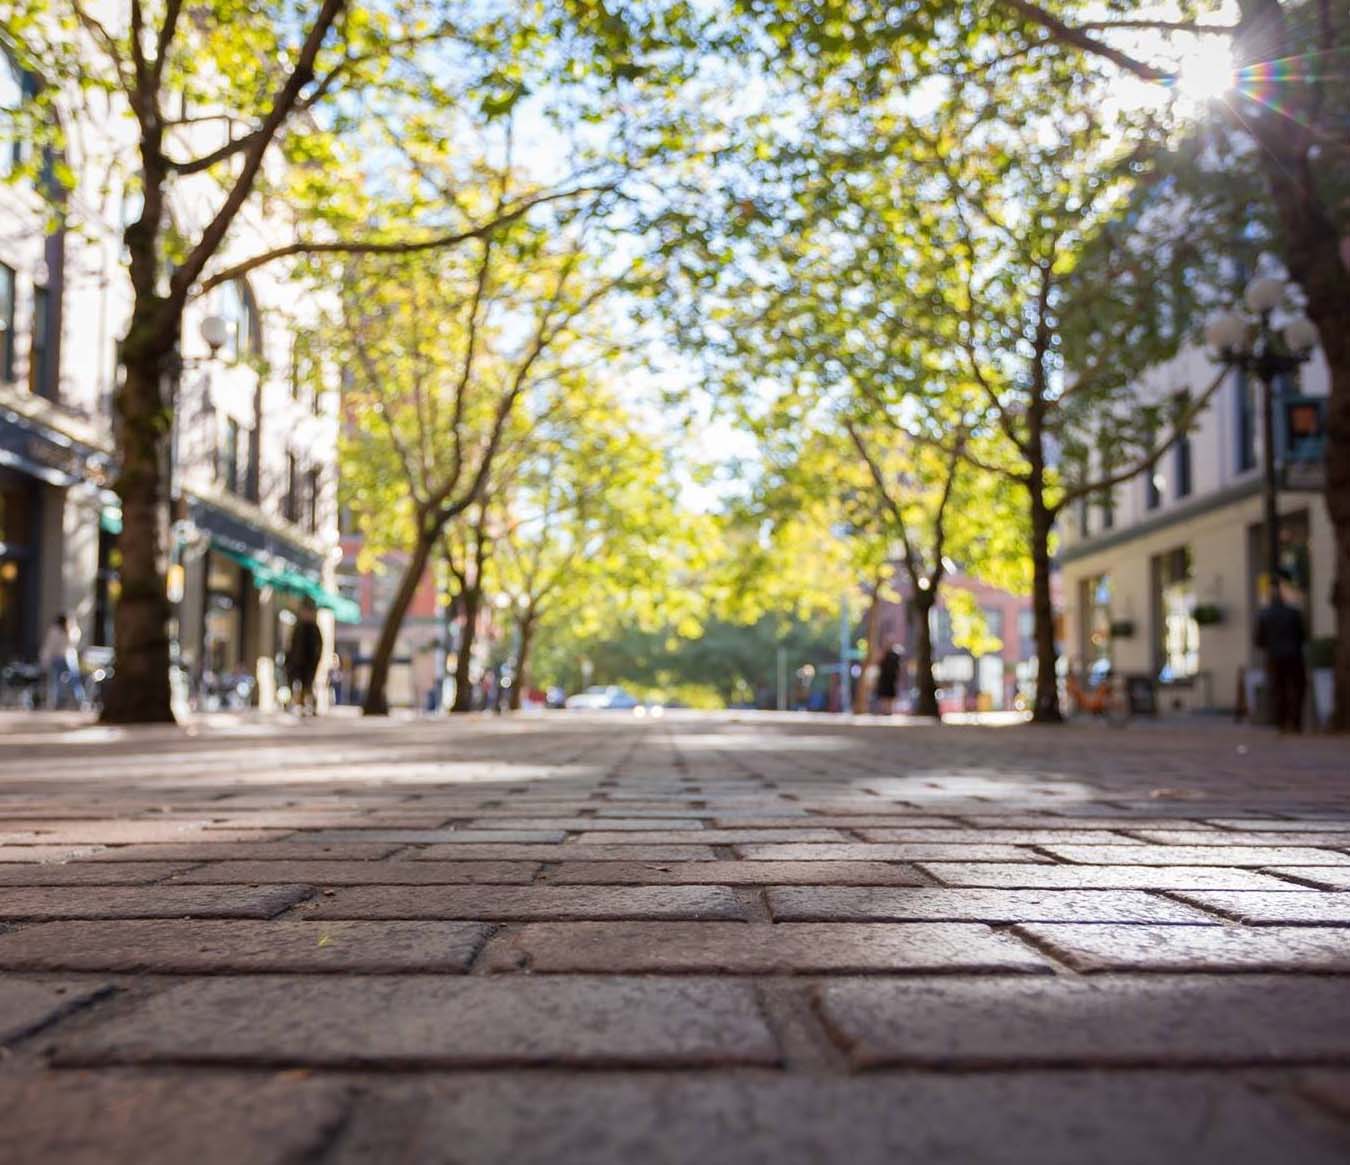 Things to Do in Seattle - Pioneer Square